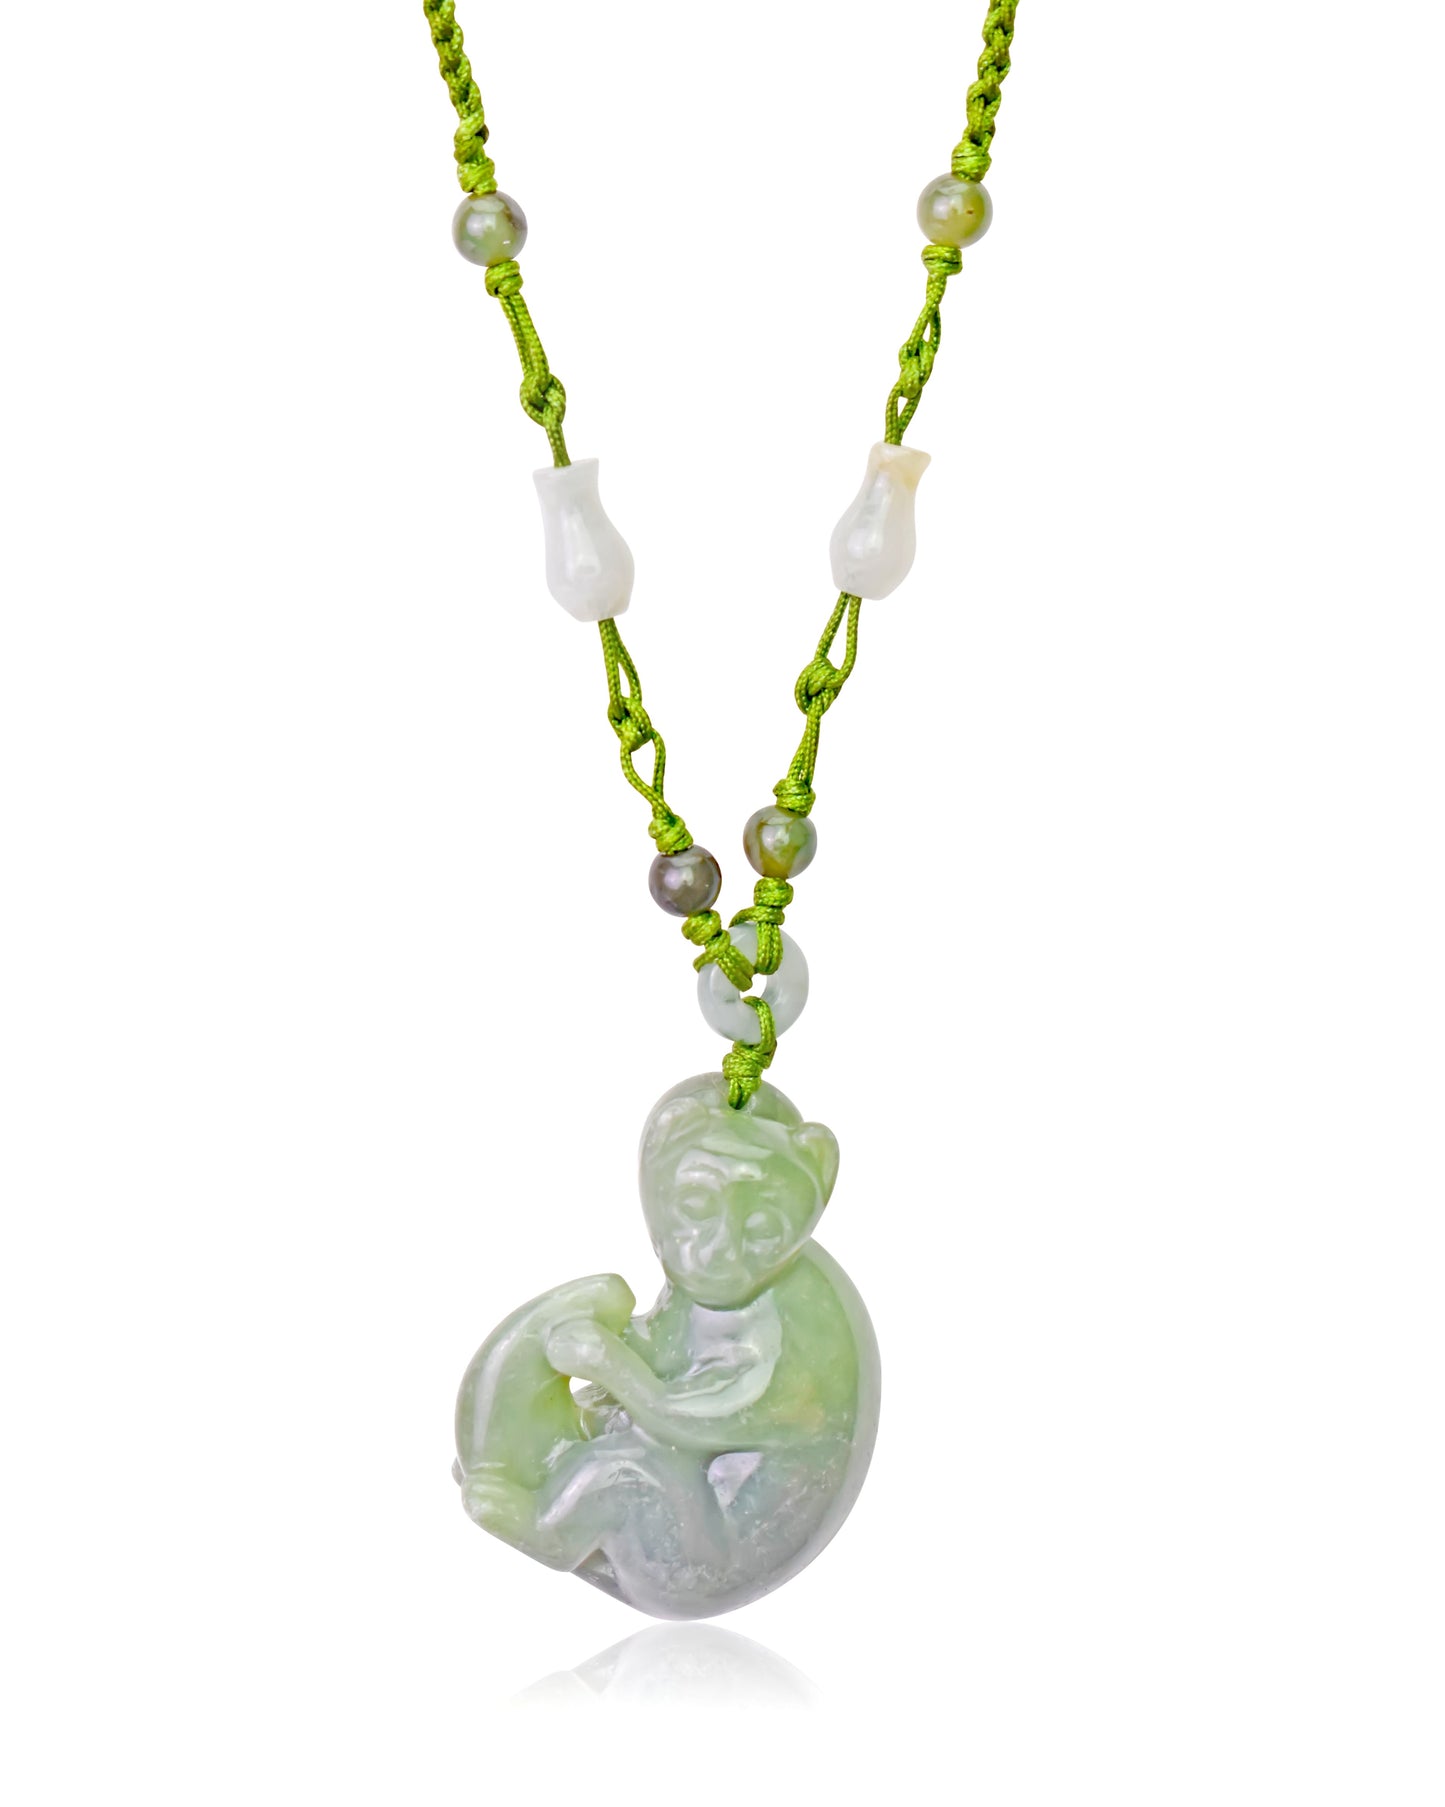 Unique Handmade Jewelry: Banana Monkey Jade Necklace made Lime Cord